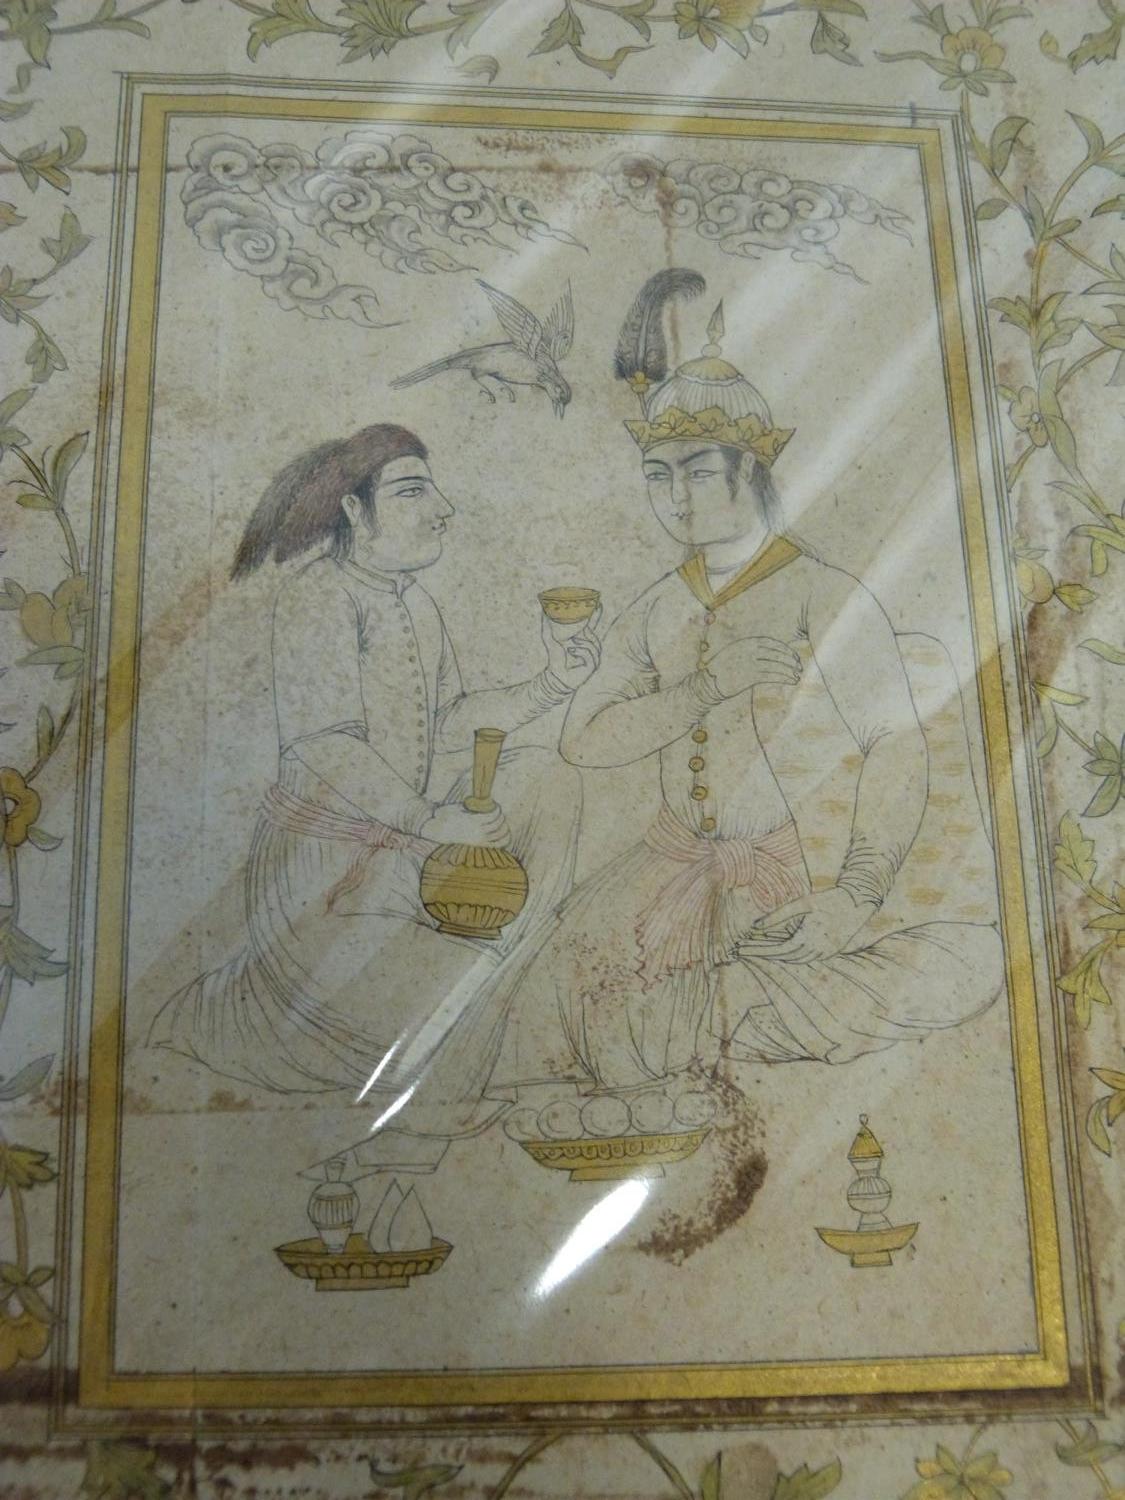 A 19th century Persian Safavid style miniature painting on parchment depicting a servant offering - Image 2 of 4